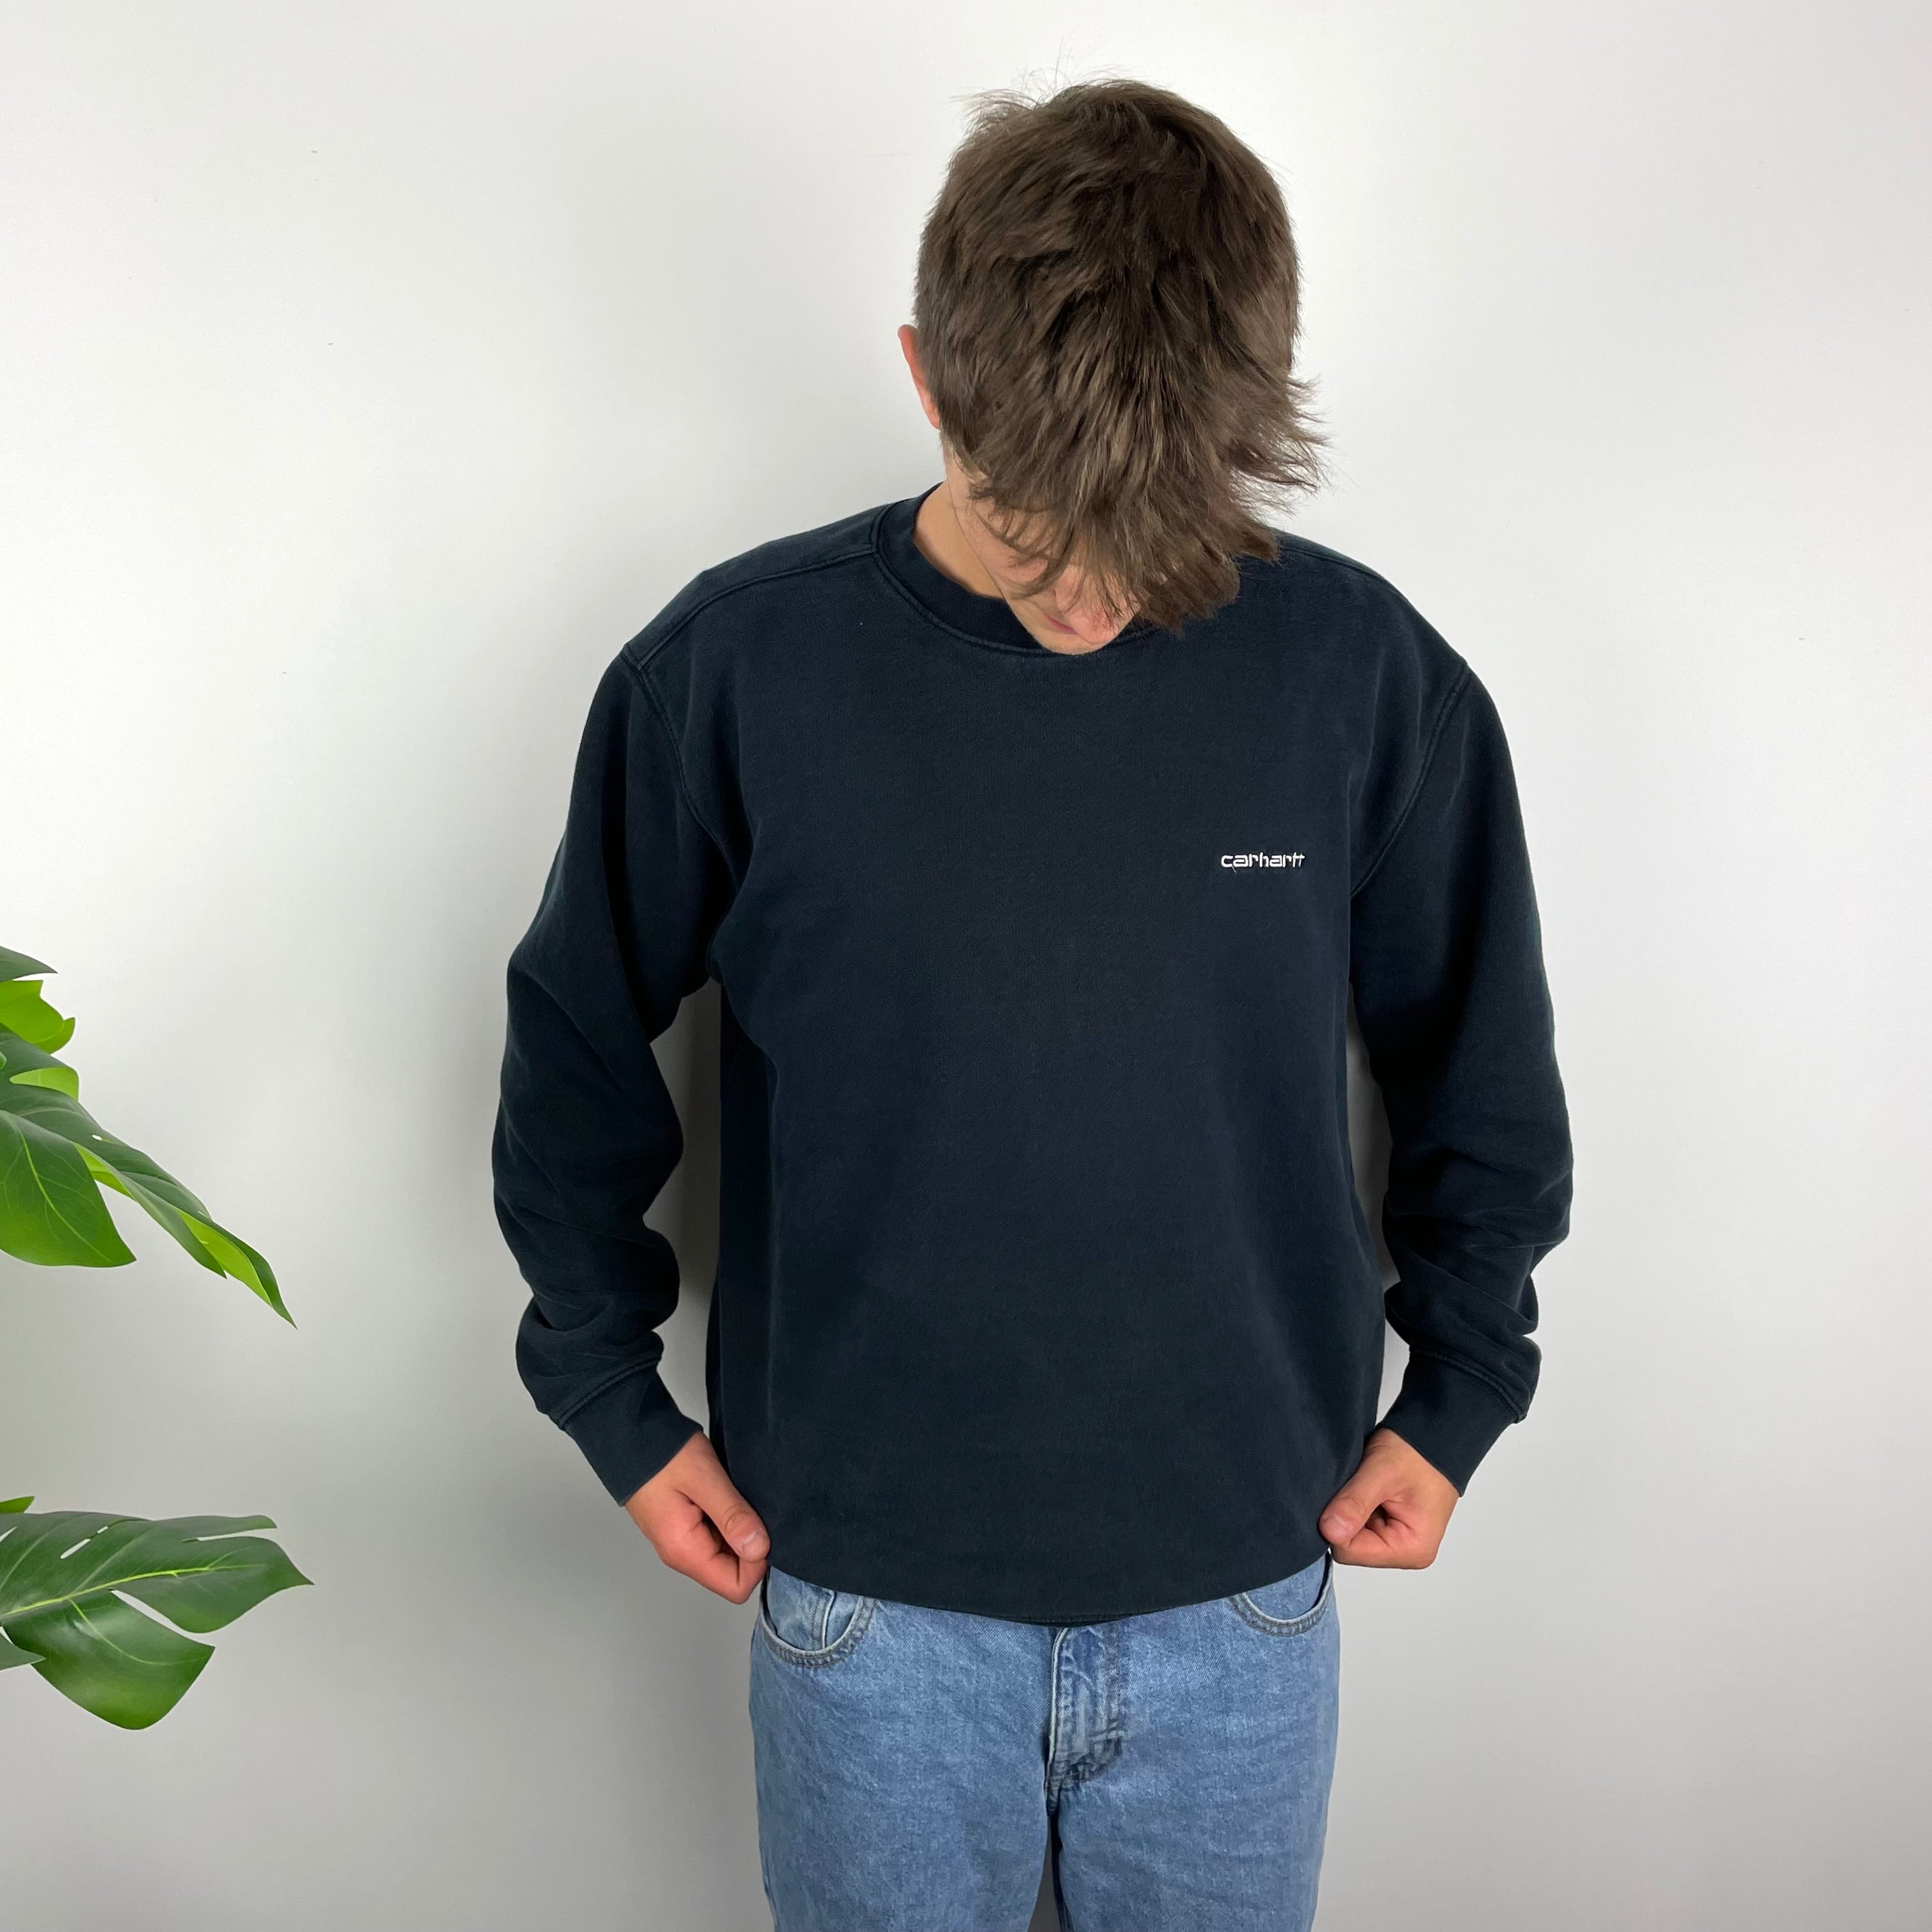 Carhartt RARE Navy Embroidered Spell Out Sweatshirt (L)